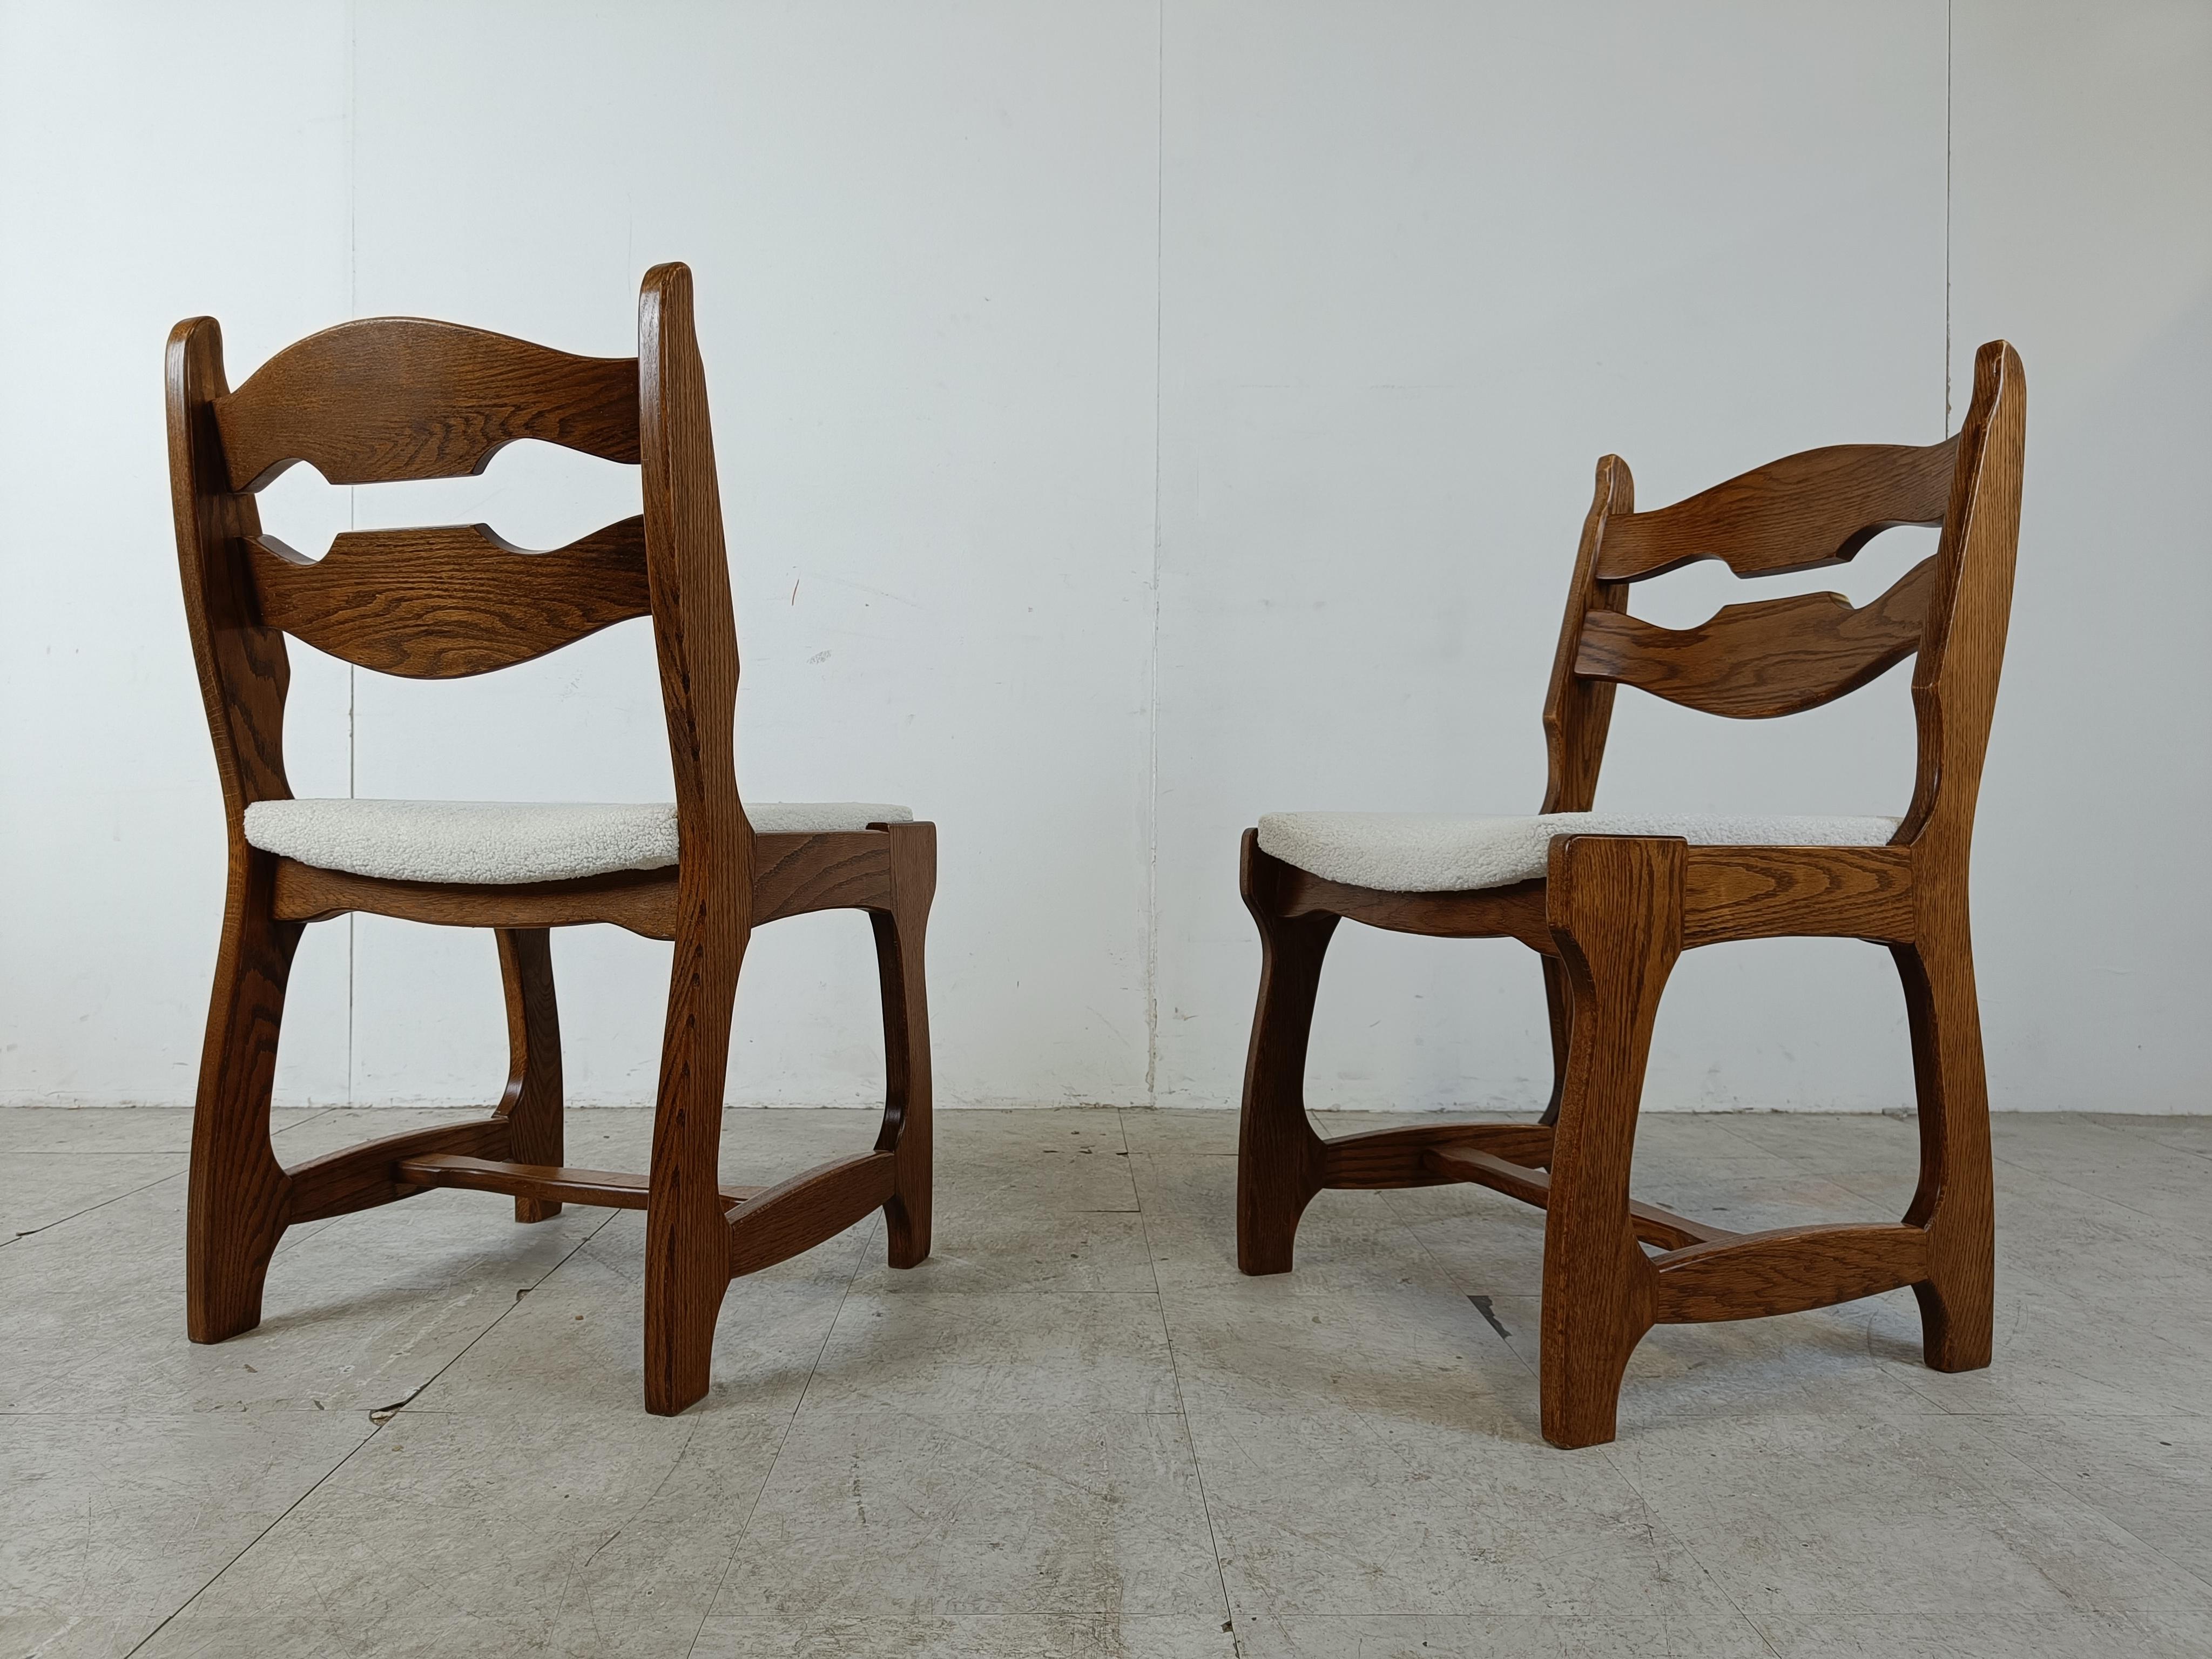 Vintage brutalist dining chairs, set of 6 - 1960s  1